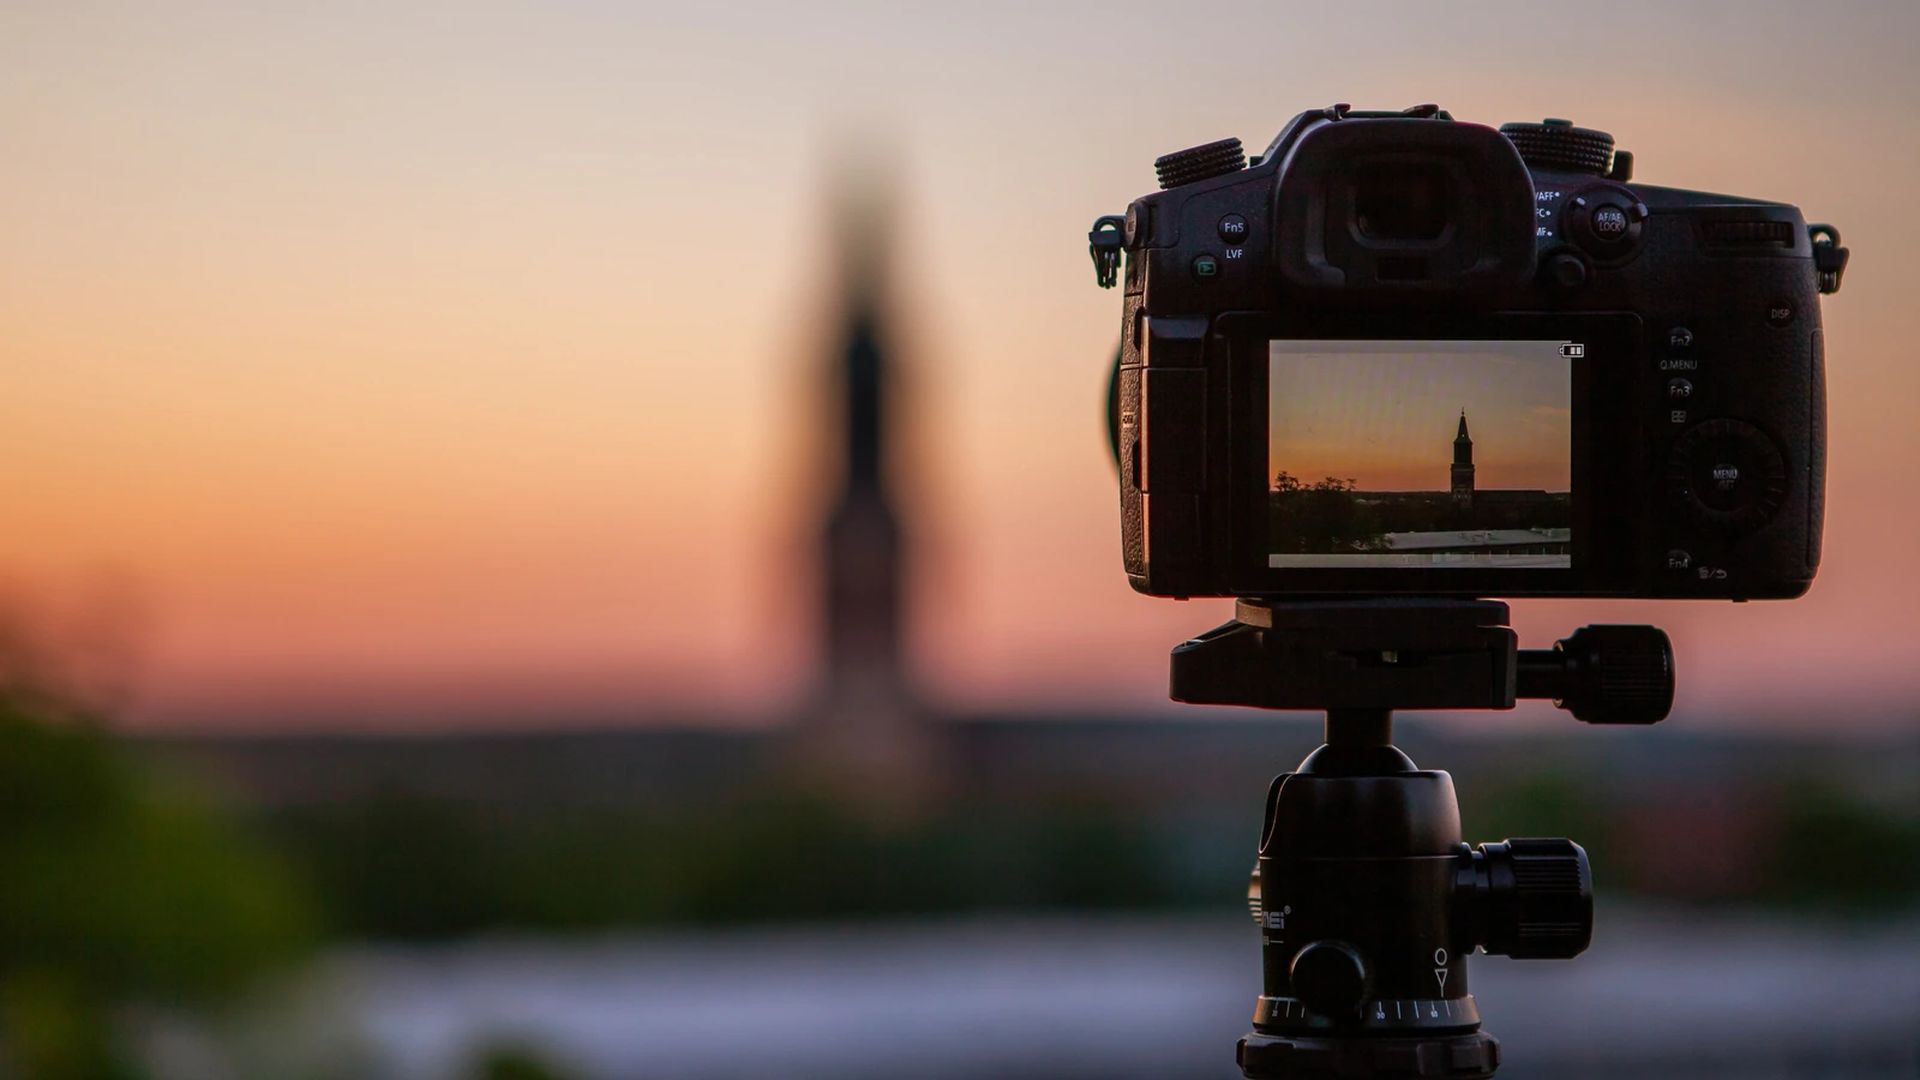 In this article, we are covering 13 photography tips for smartphones in honor of World Photography Day, so you can take the best photos possible.